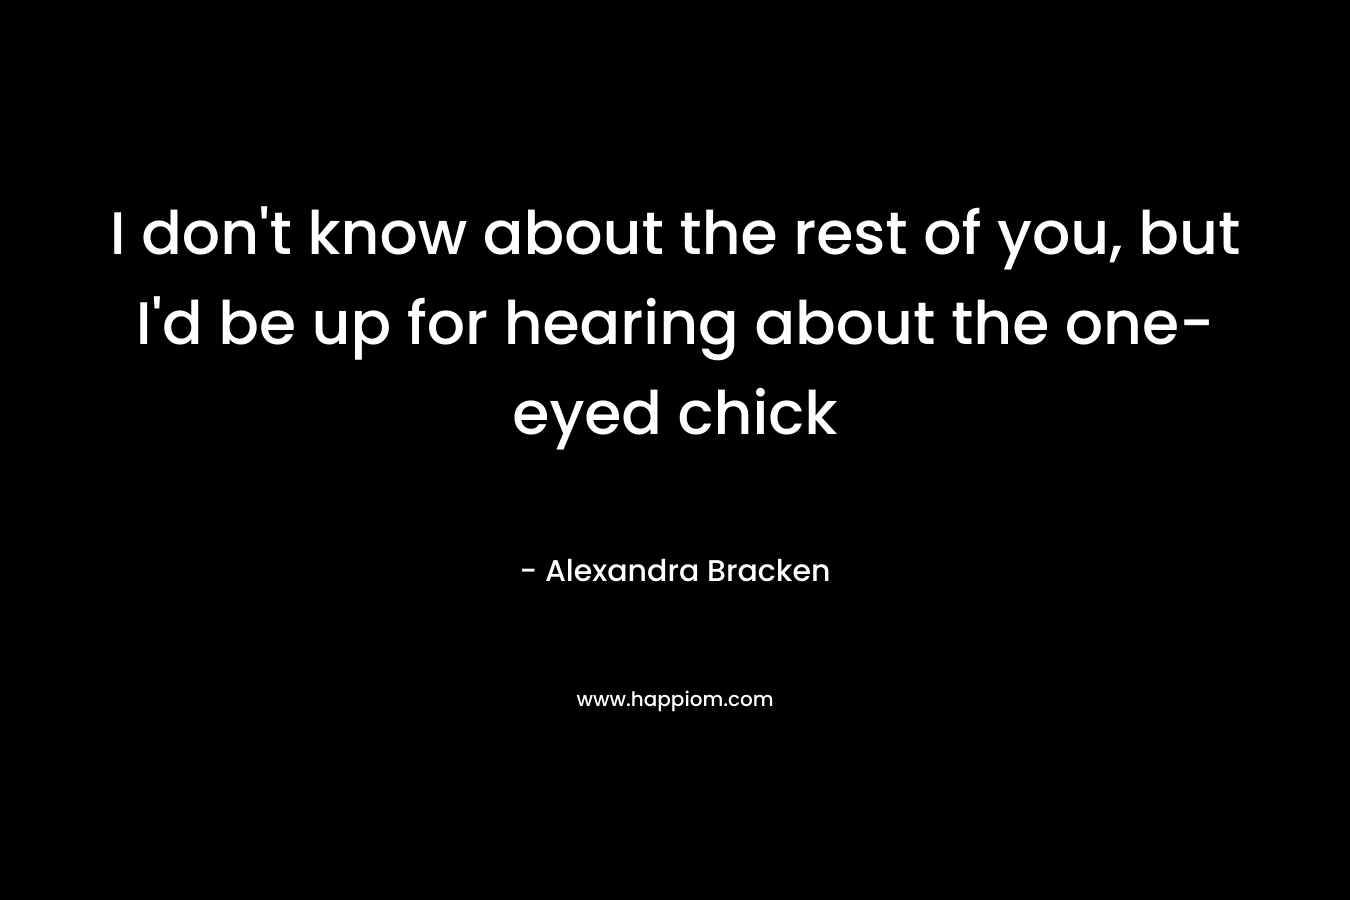 I don’t know about the rest of you, but I’d be up for hearing about the one-eyed chick – Alexandra Bracken